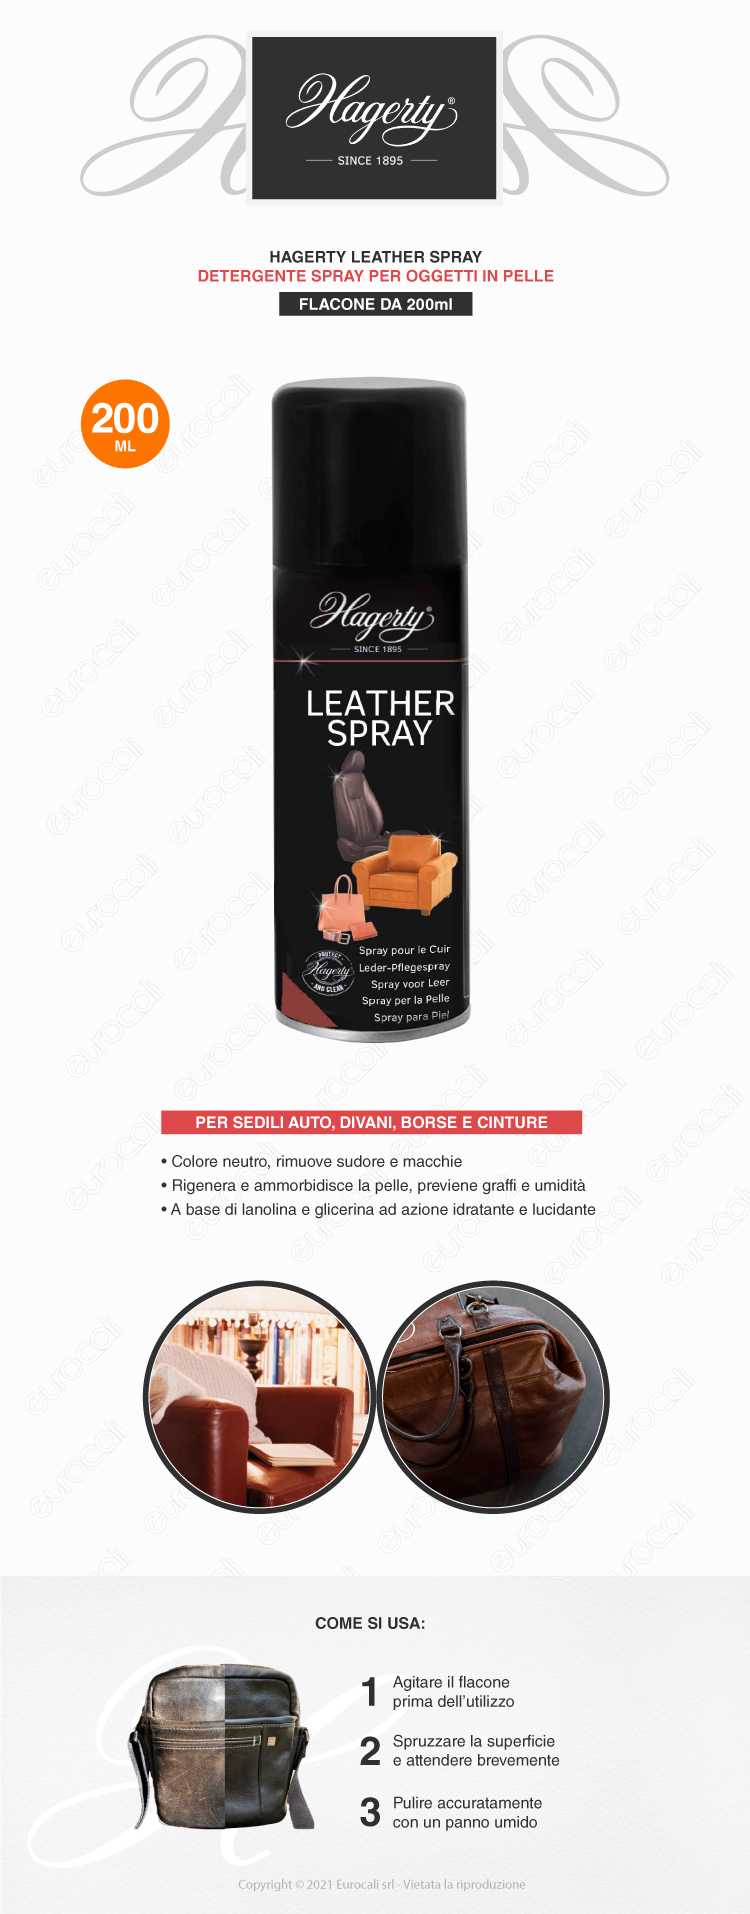 hagerty leather spray pulitore pelle 200ml